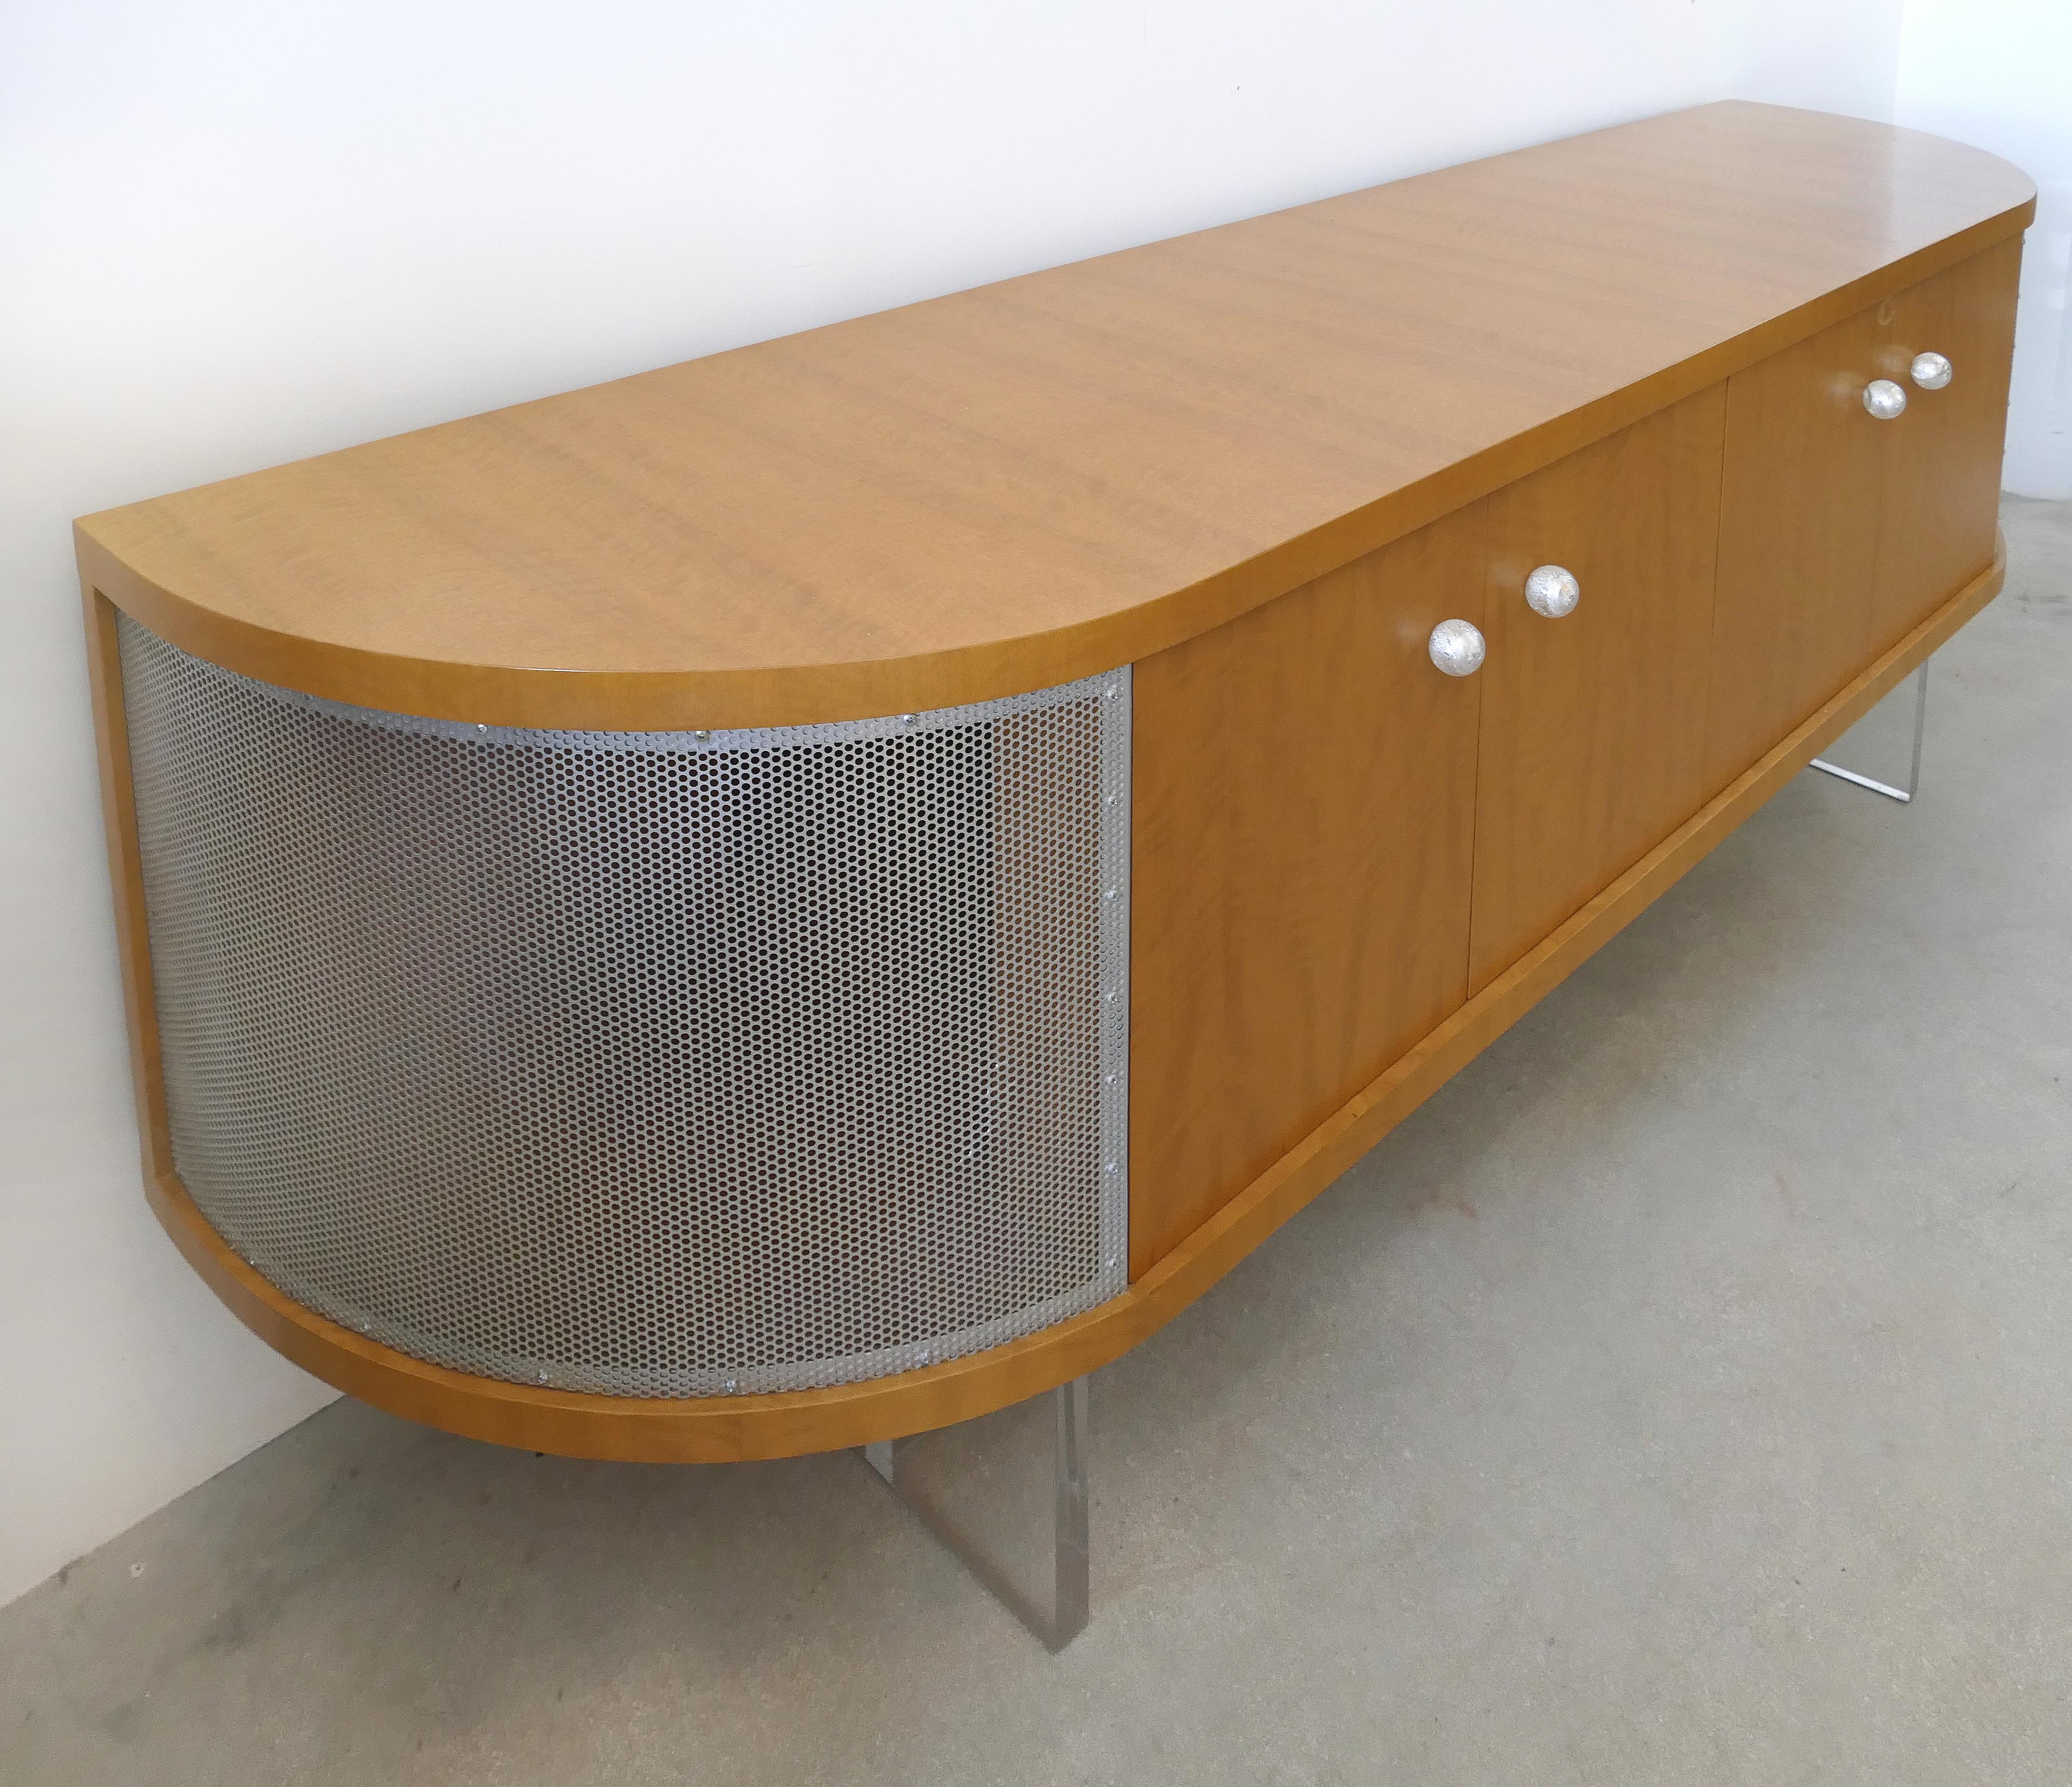 Maple media cabinet/credenza with Lucite base and glass handles, custom made

Offered for sale is a custom made maple wood media cabinet with beautifully matched grain maple veneers, blown glass handles, a thick Lucite base and pierced metal